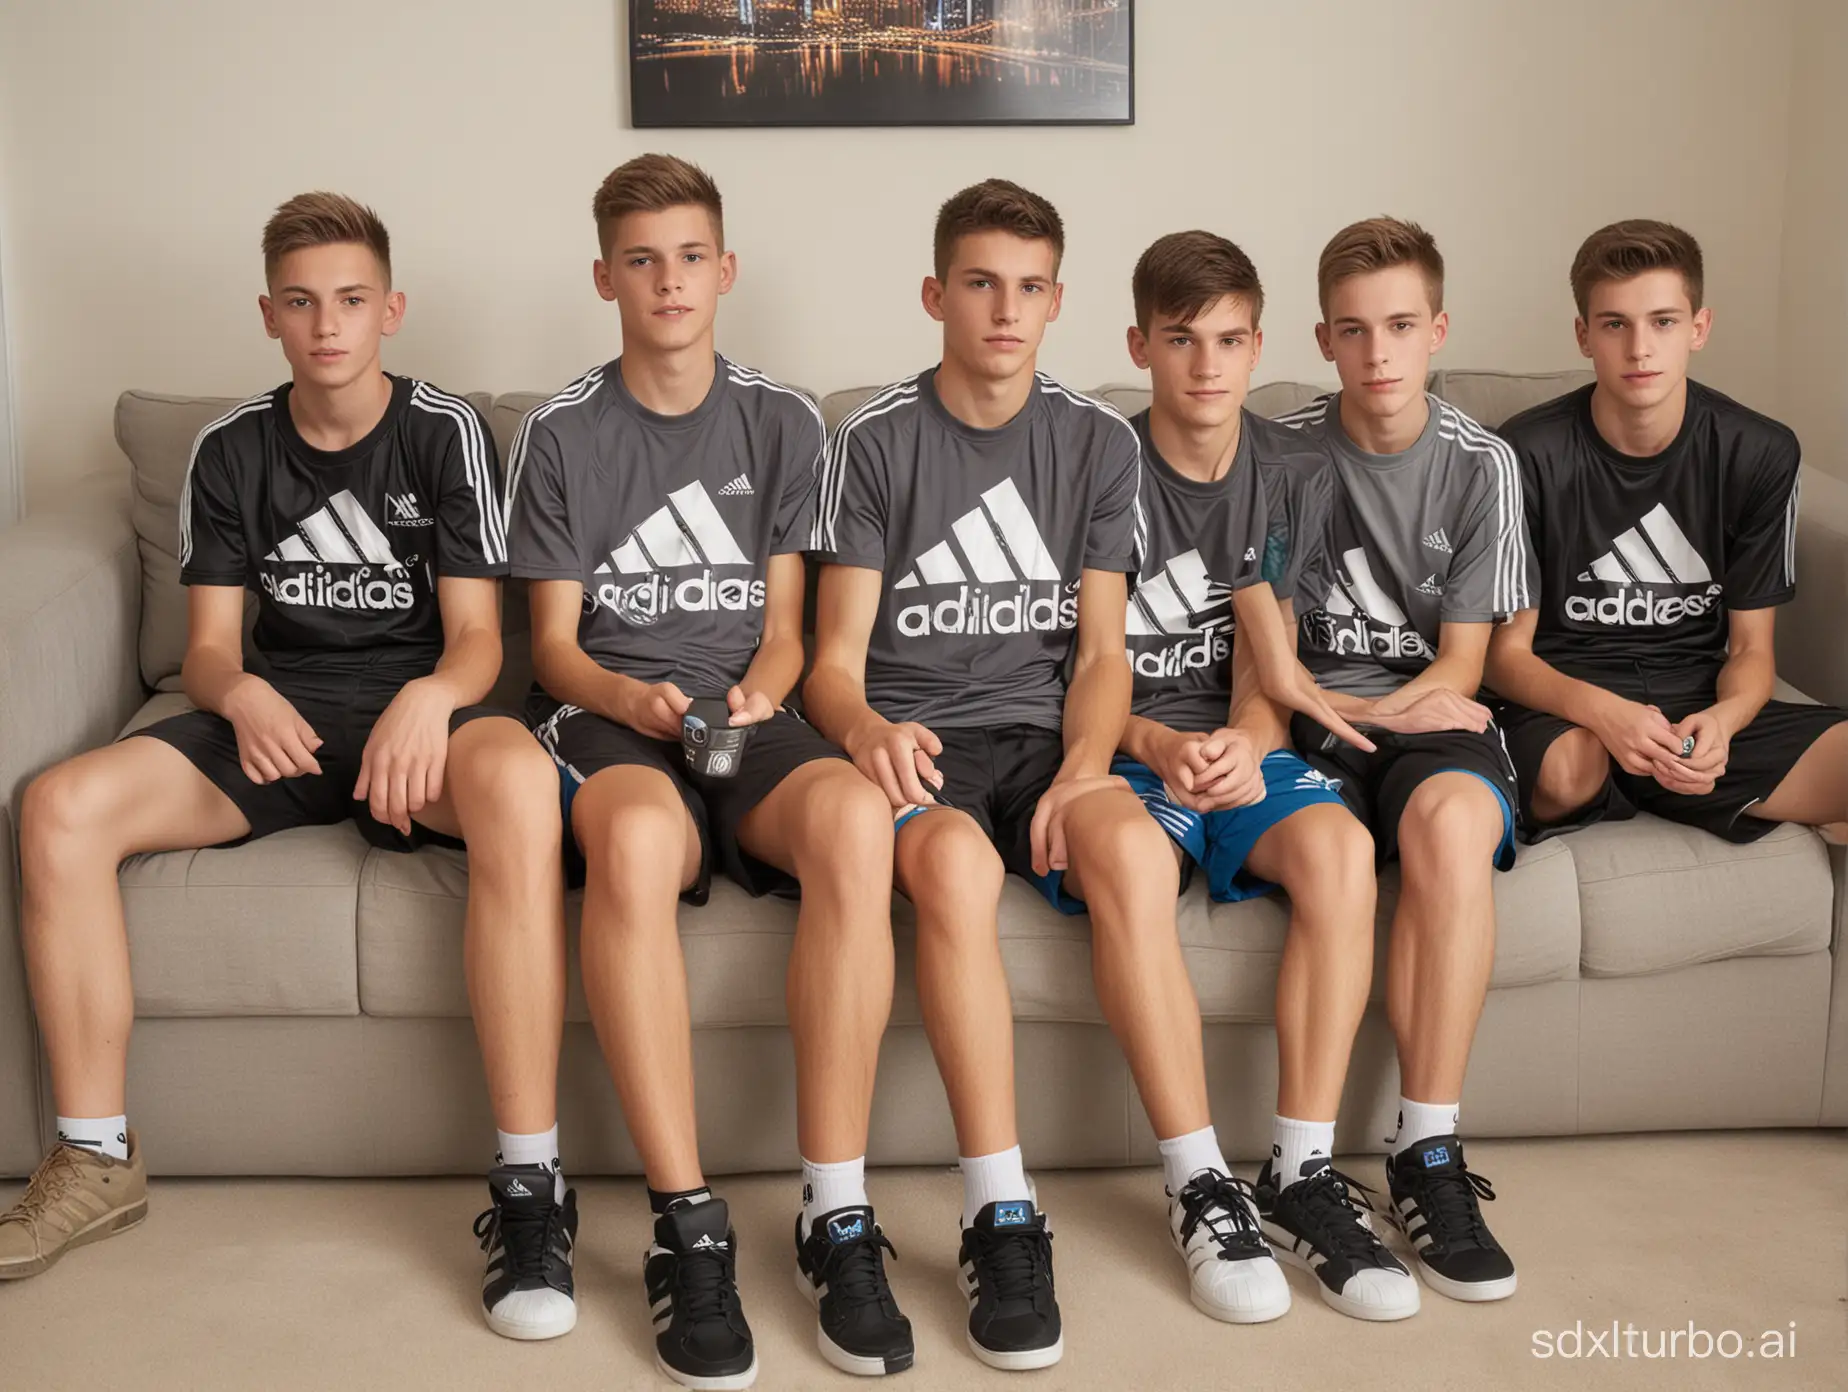 Adidas-Shorts-Clad-14YearOld-Gamer-Boys-Relaxing-on-Couch